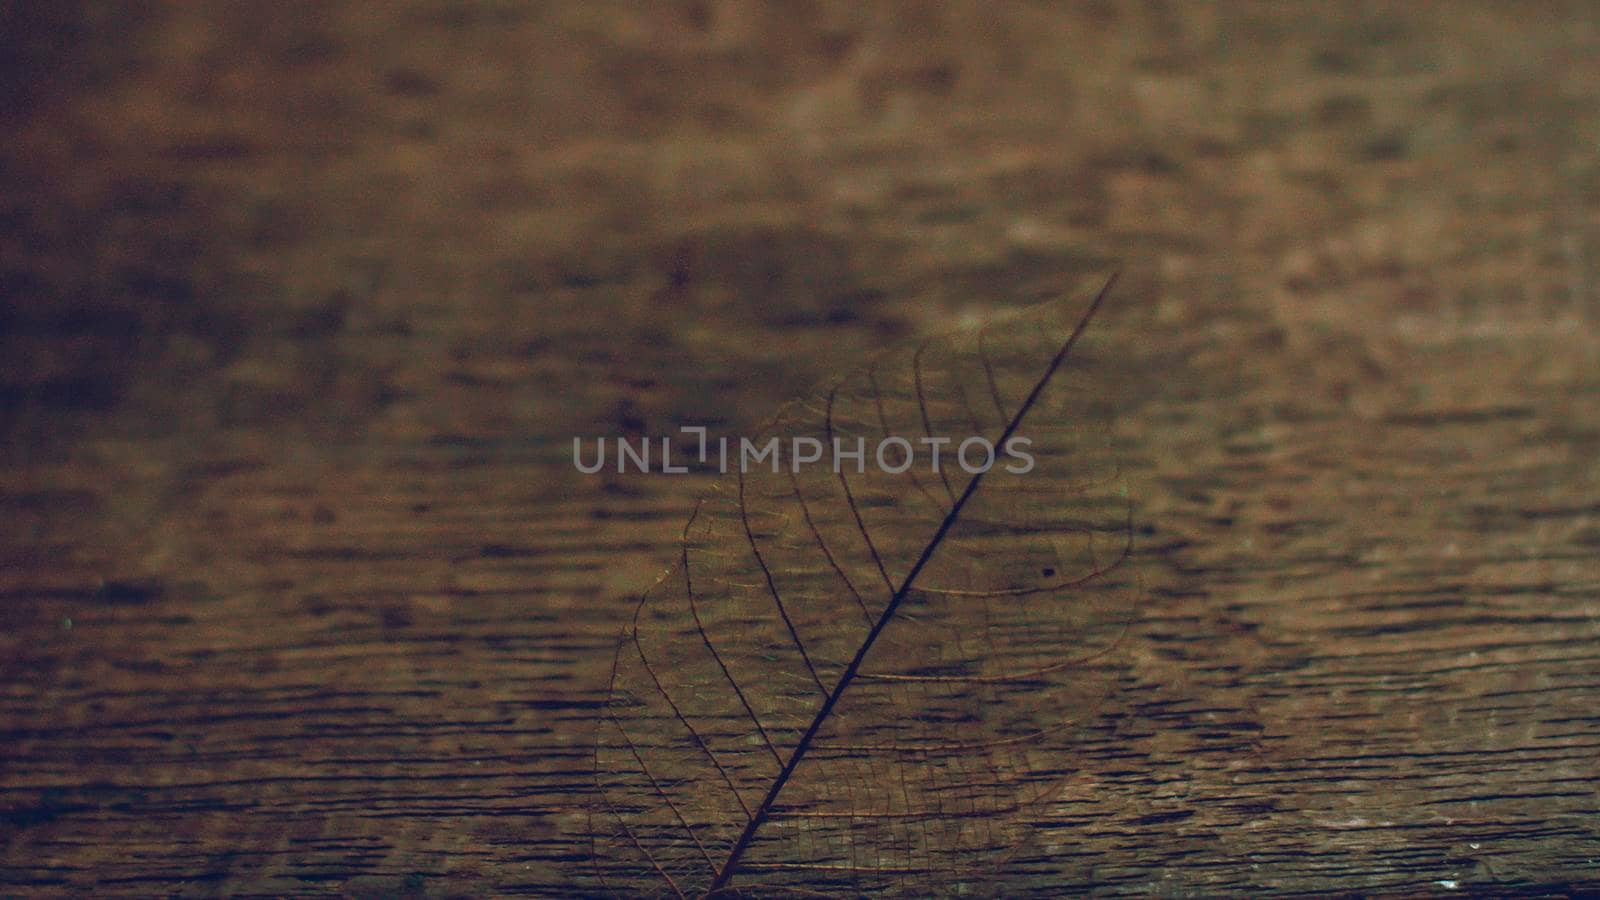 abstract transparenct leaf over wooden table background. nature concept idea